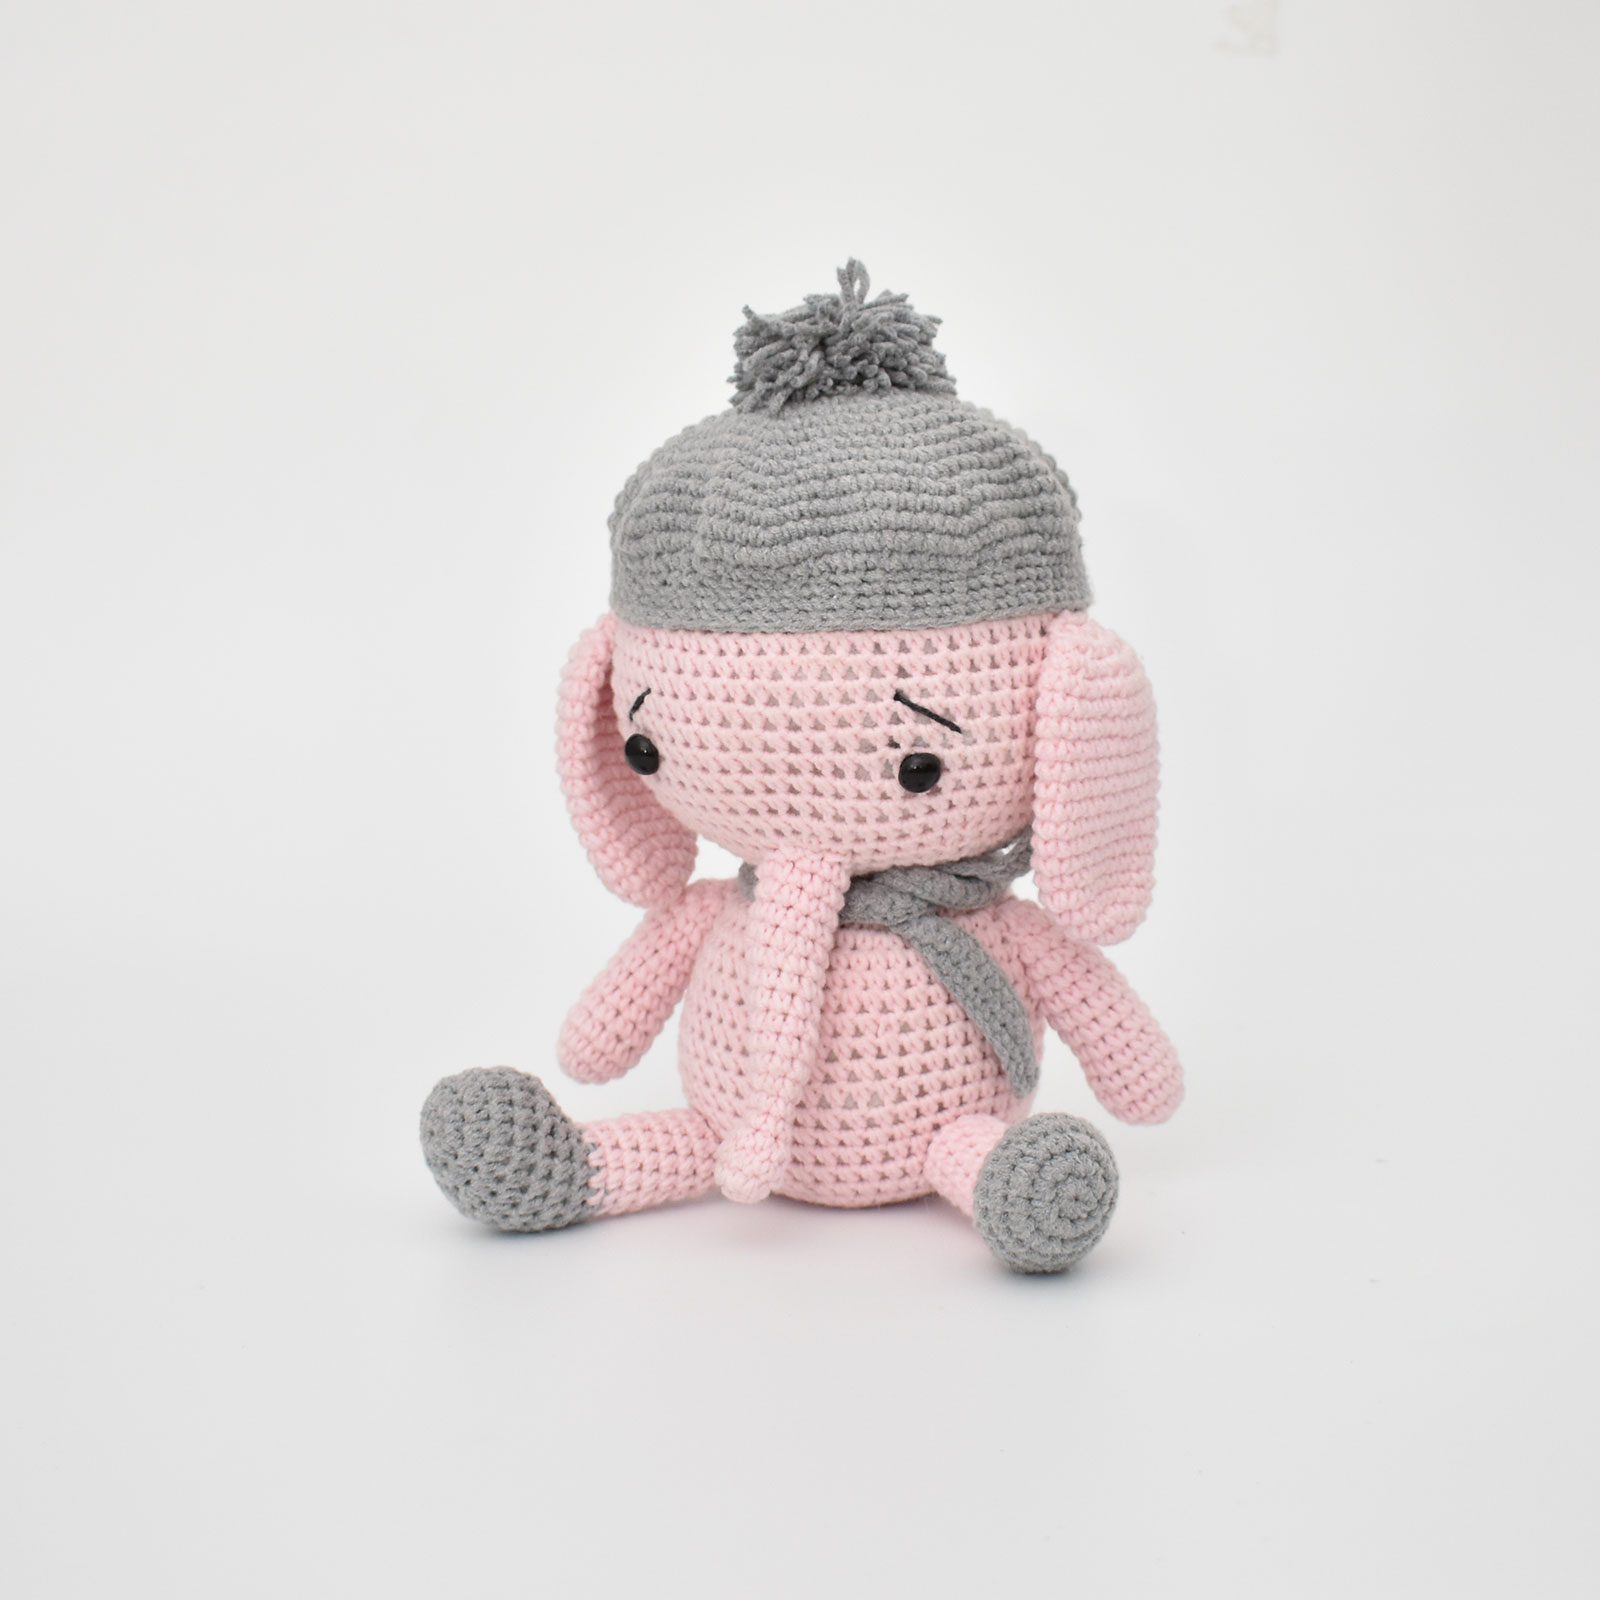 Free Knitting Patterns For Dolls Hats Details About Ba Elephant With Hat Handmade Amigurumi Stuffed Toy Knitting Crochet Doll